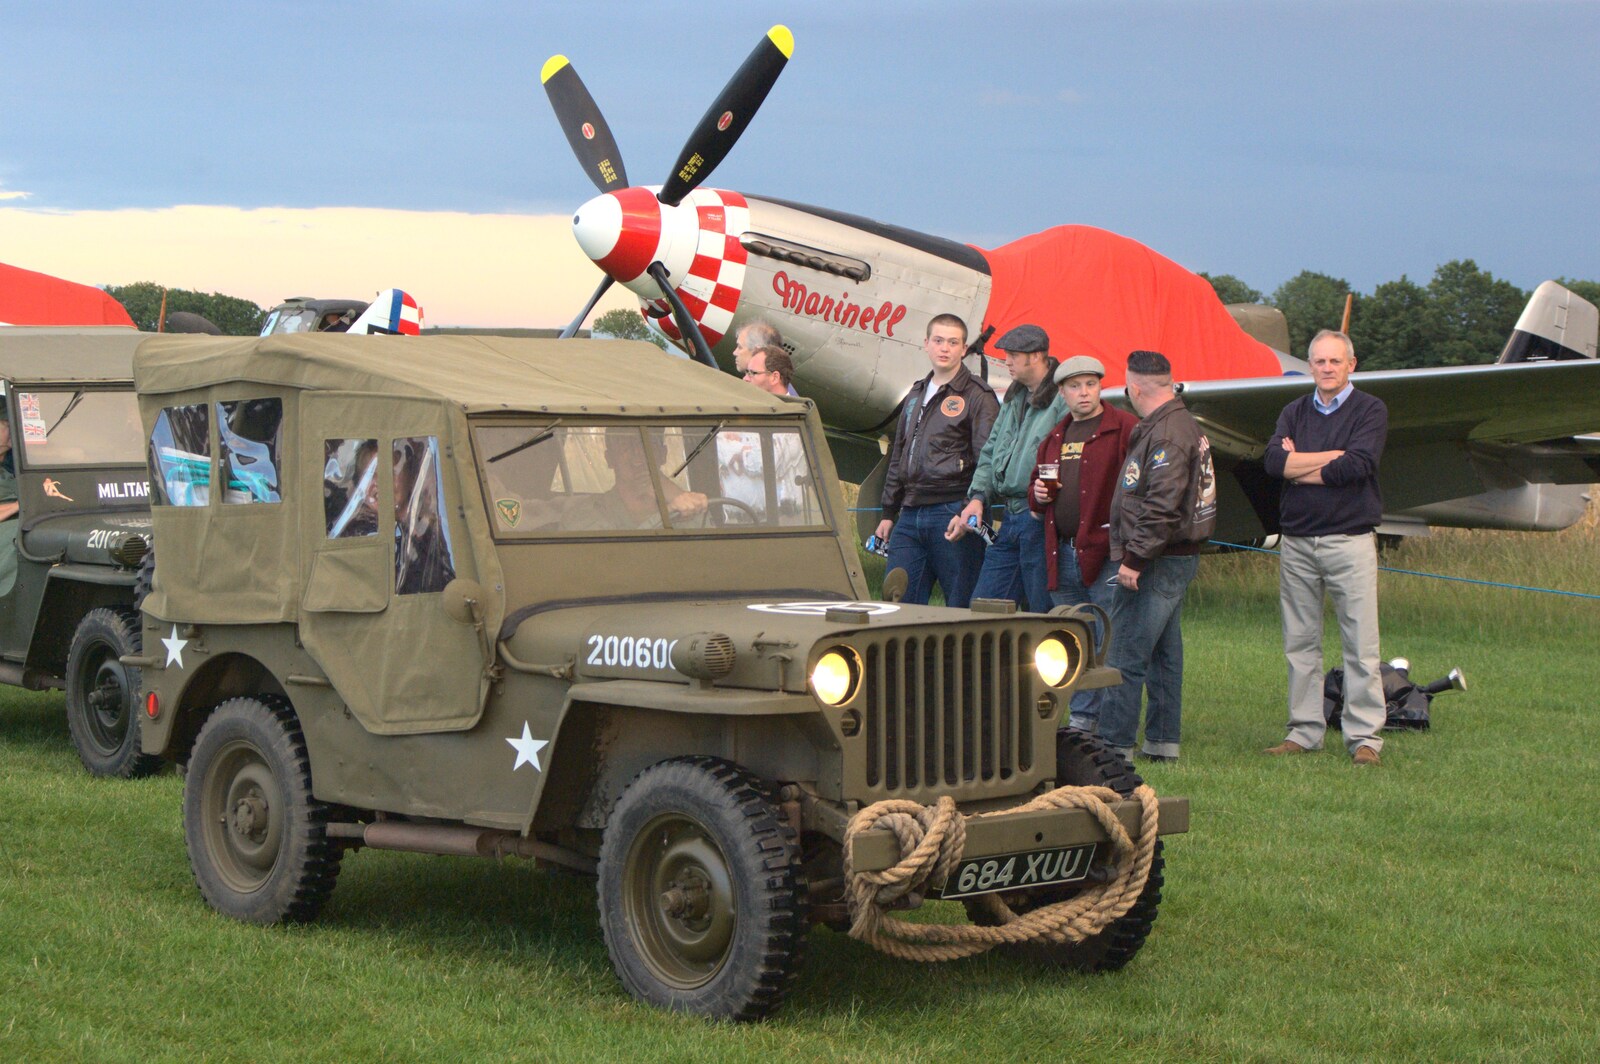 A Jeep trundles in front of Marinell from Maurice's Mustang Hangar Dance, Hardwick Airfield, Norfolk - 16th July 2011